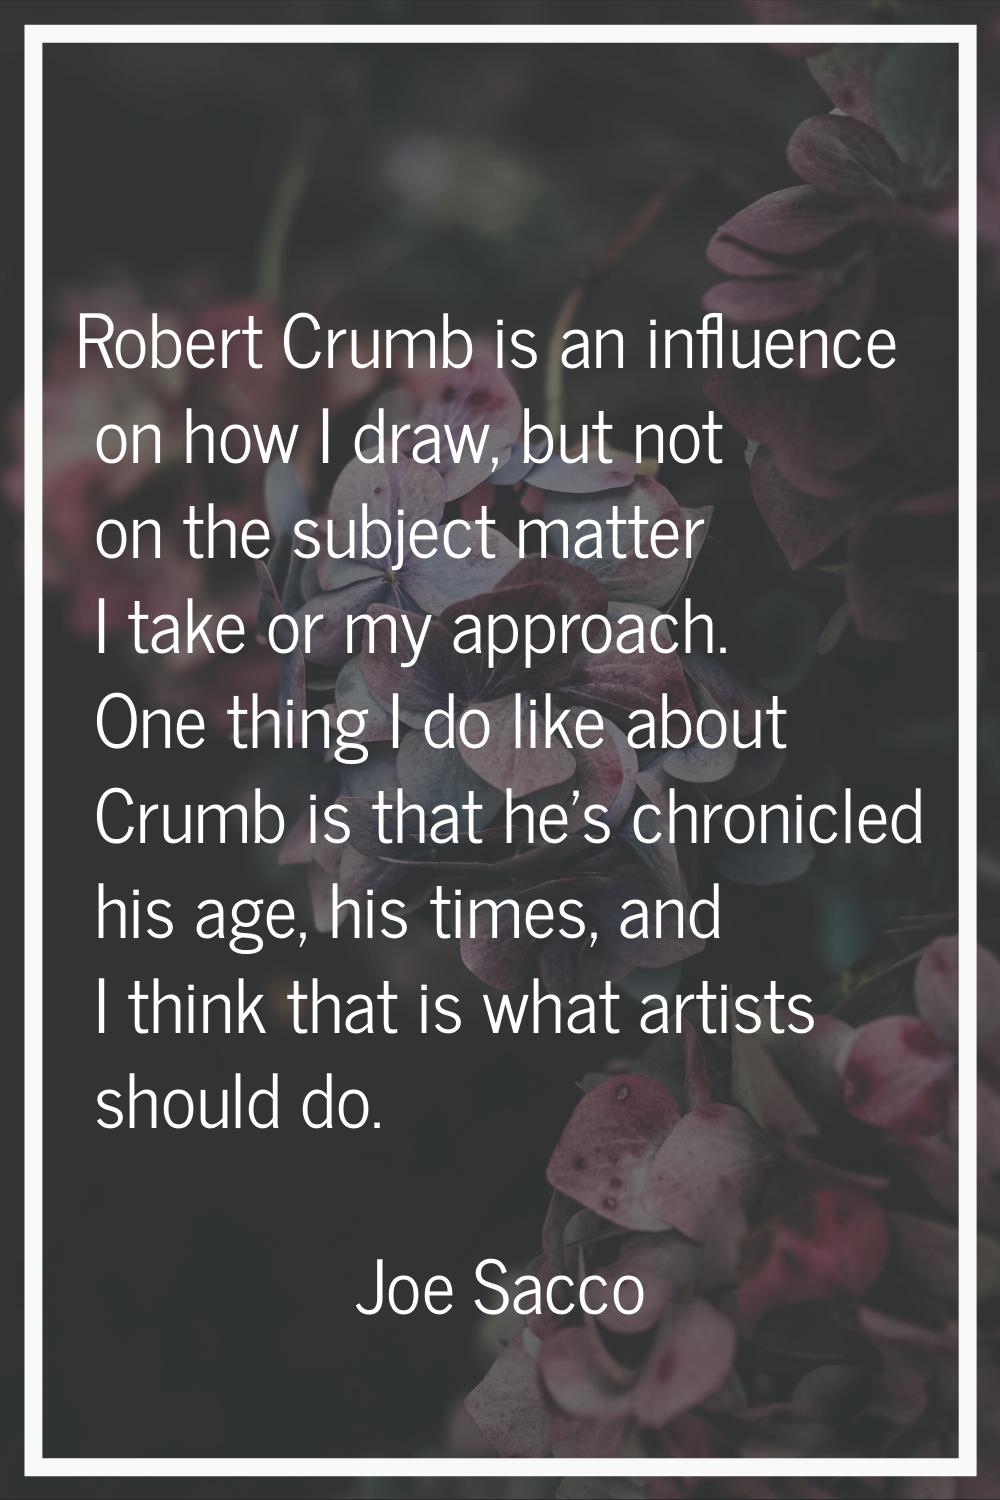 Robert Crumb is an influence on how I draw, but not on the subject matter I take or my approach. On